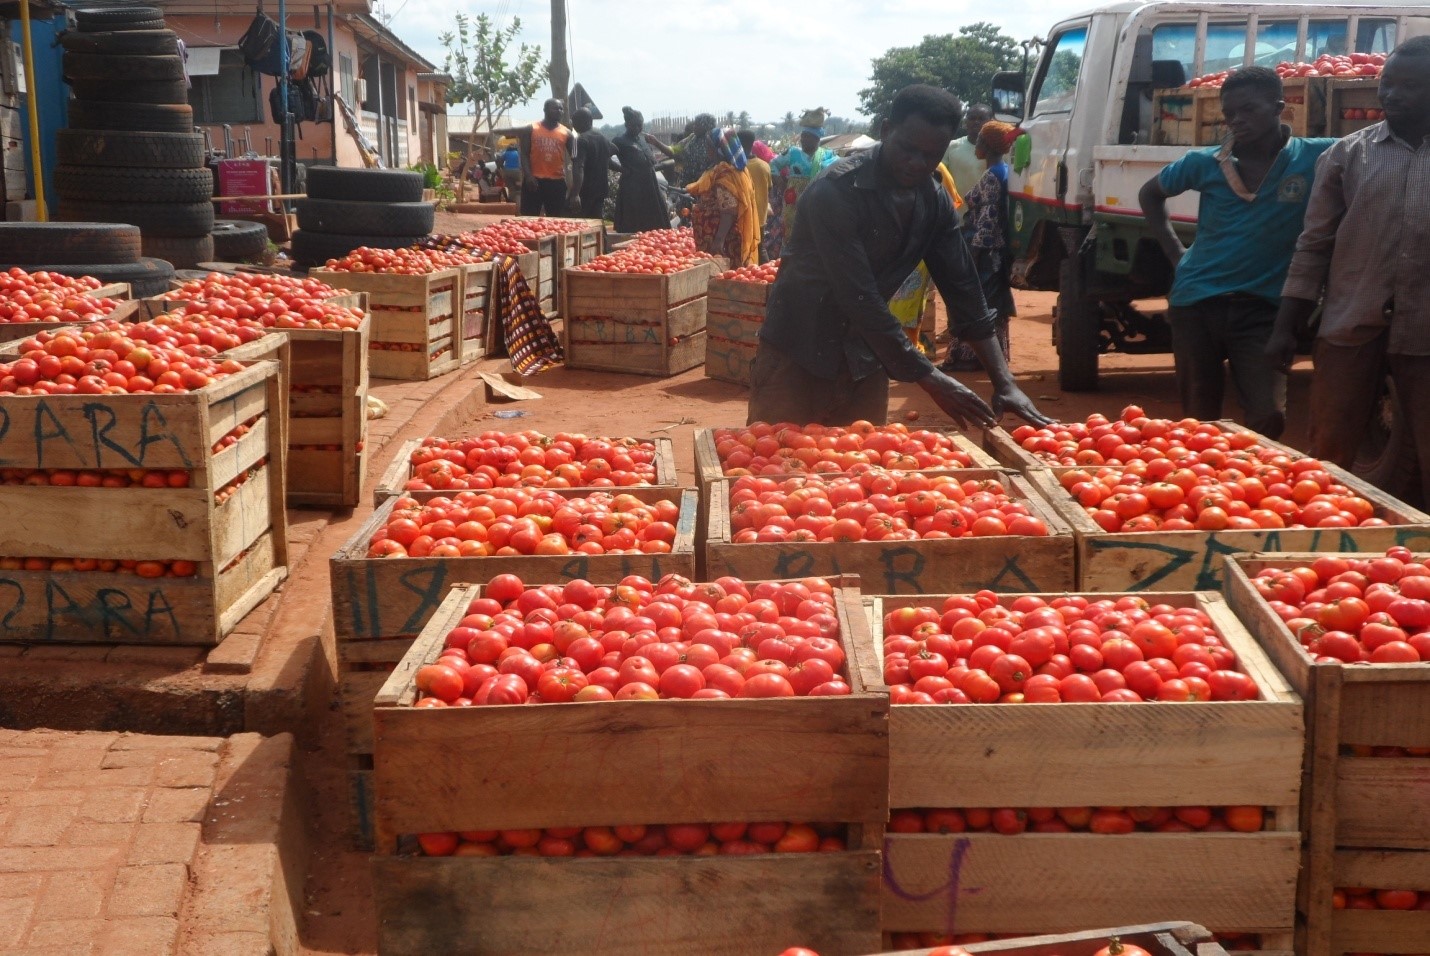 Price of tomatoes increases in Cape Coast – Survey